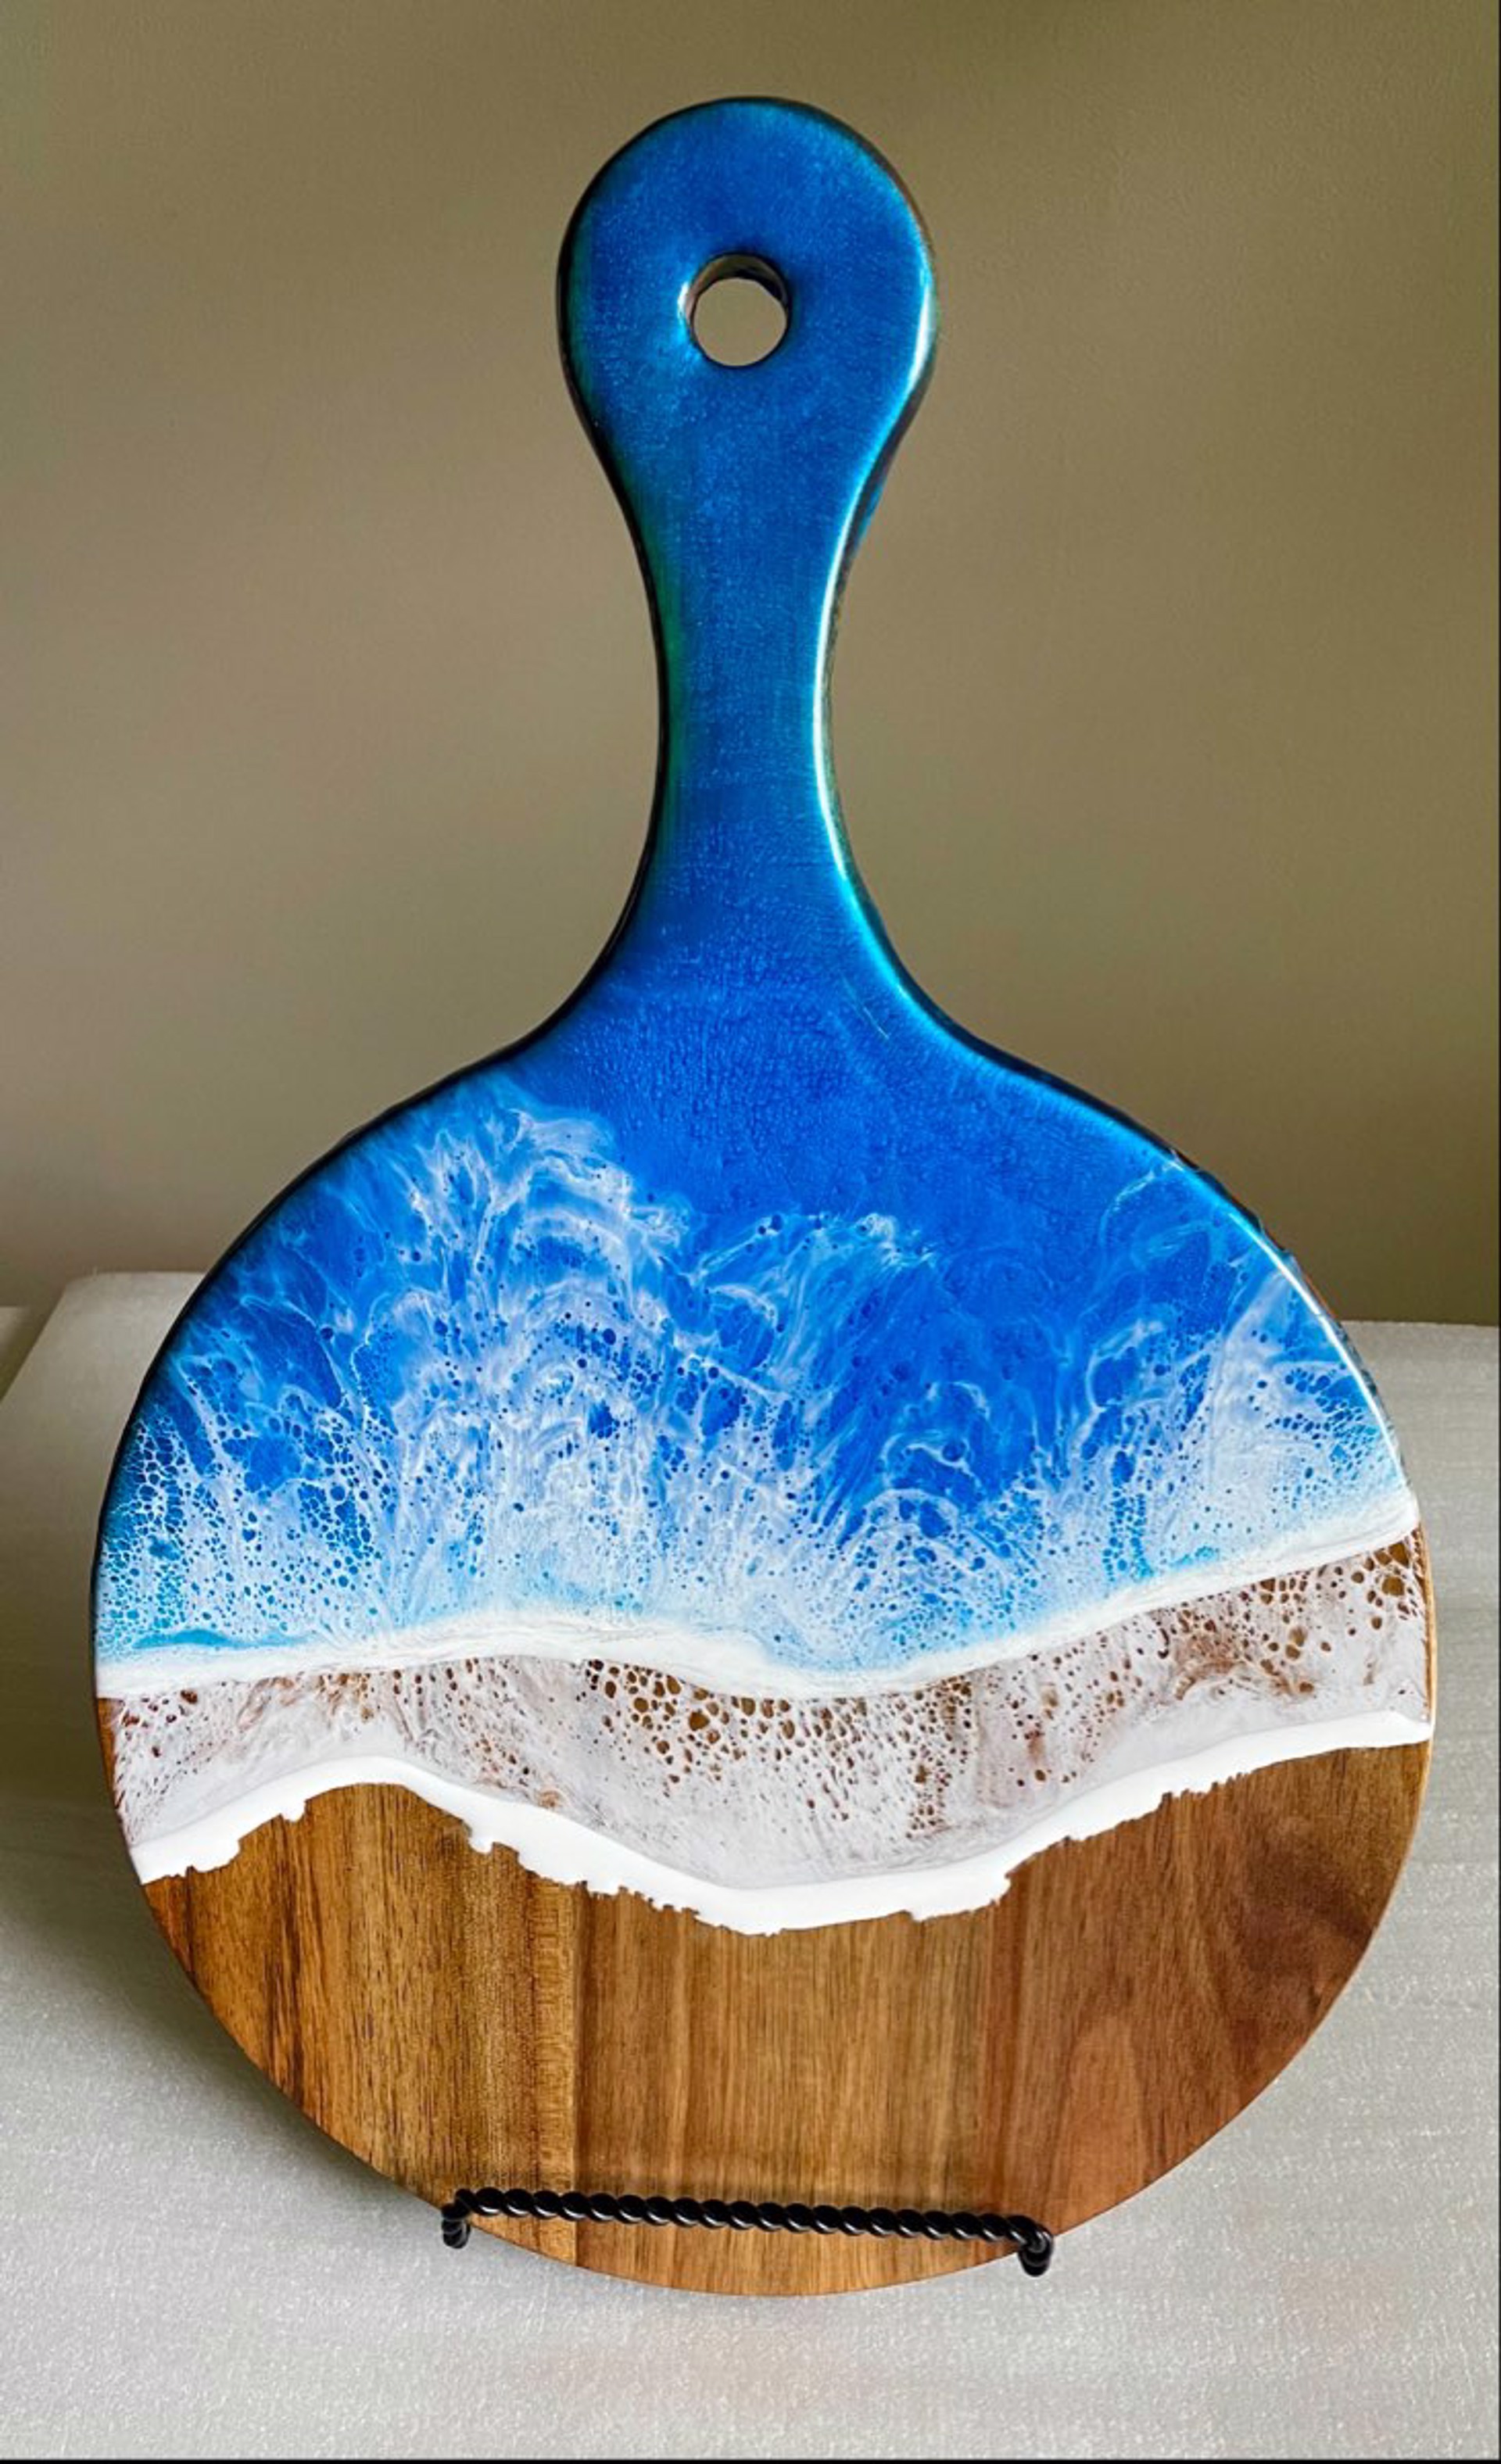 MDM22-17 Round Blue Resin and Wood Charcuterie Board by Mary Duke McCartt